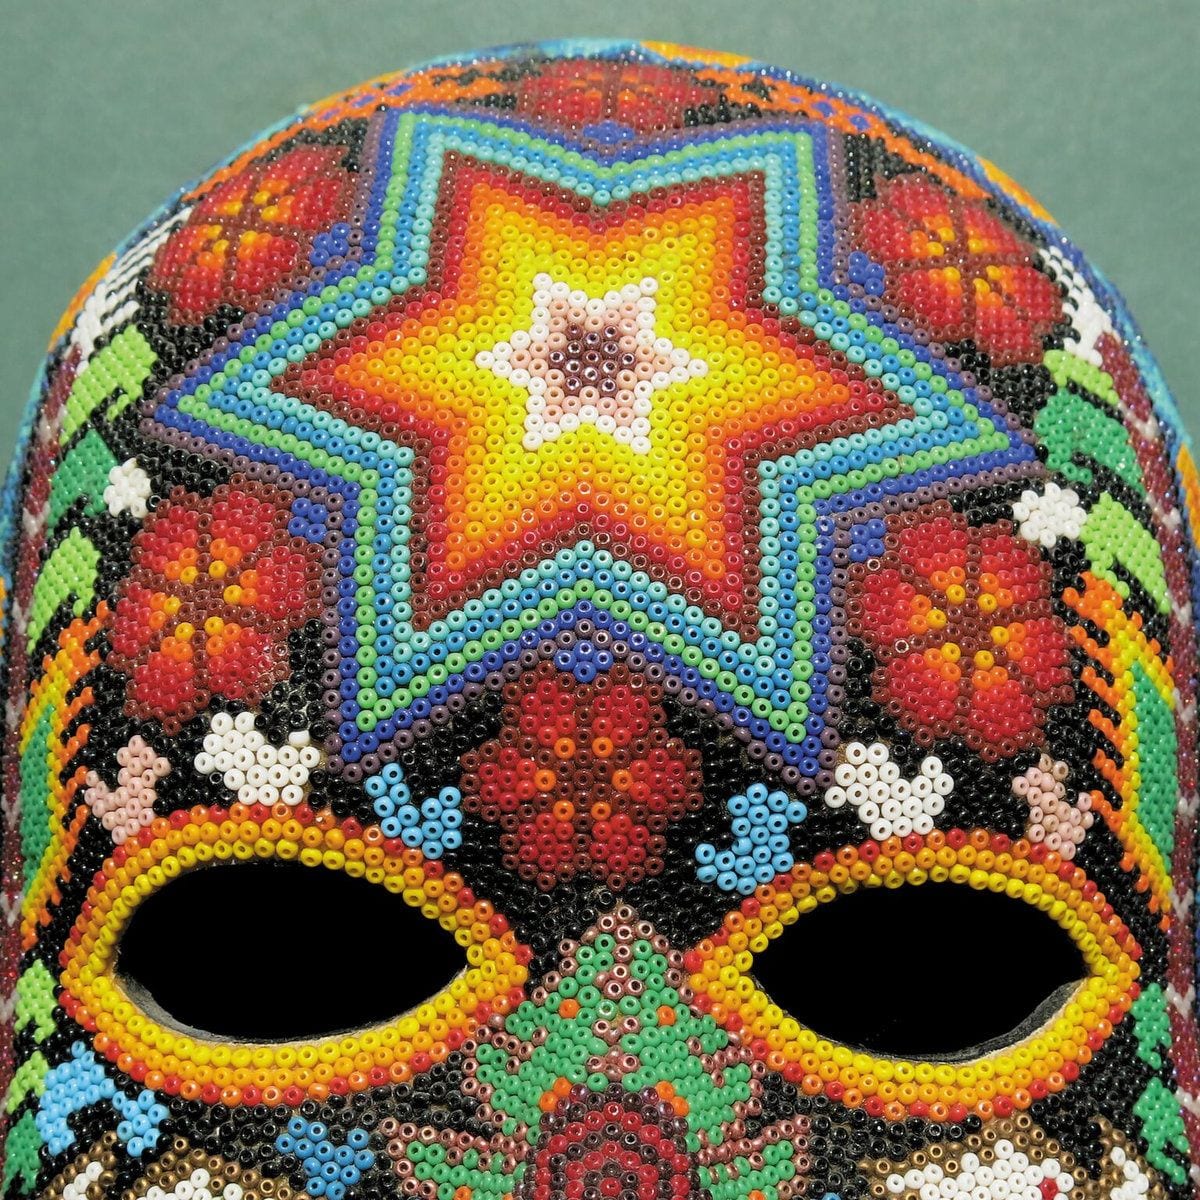 Dead Can Dance Offer Up a Brief, Largely Instrumental Album with ‘Dionysus’